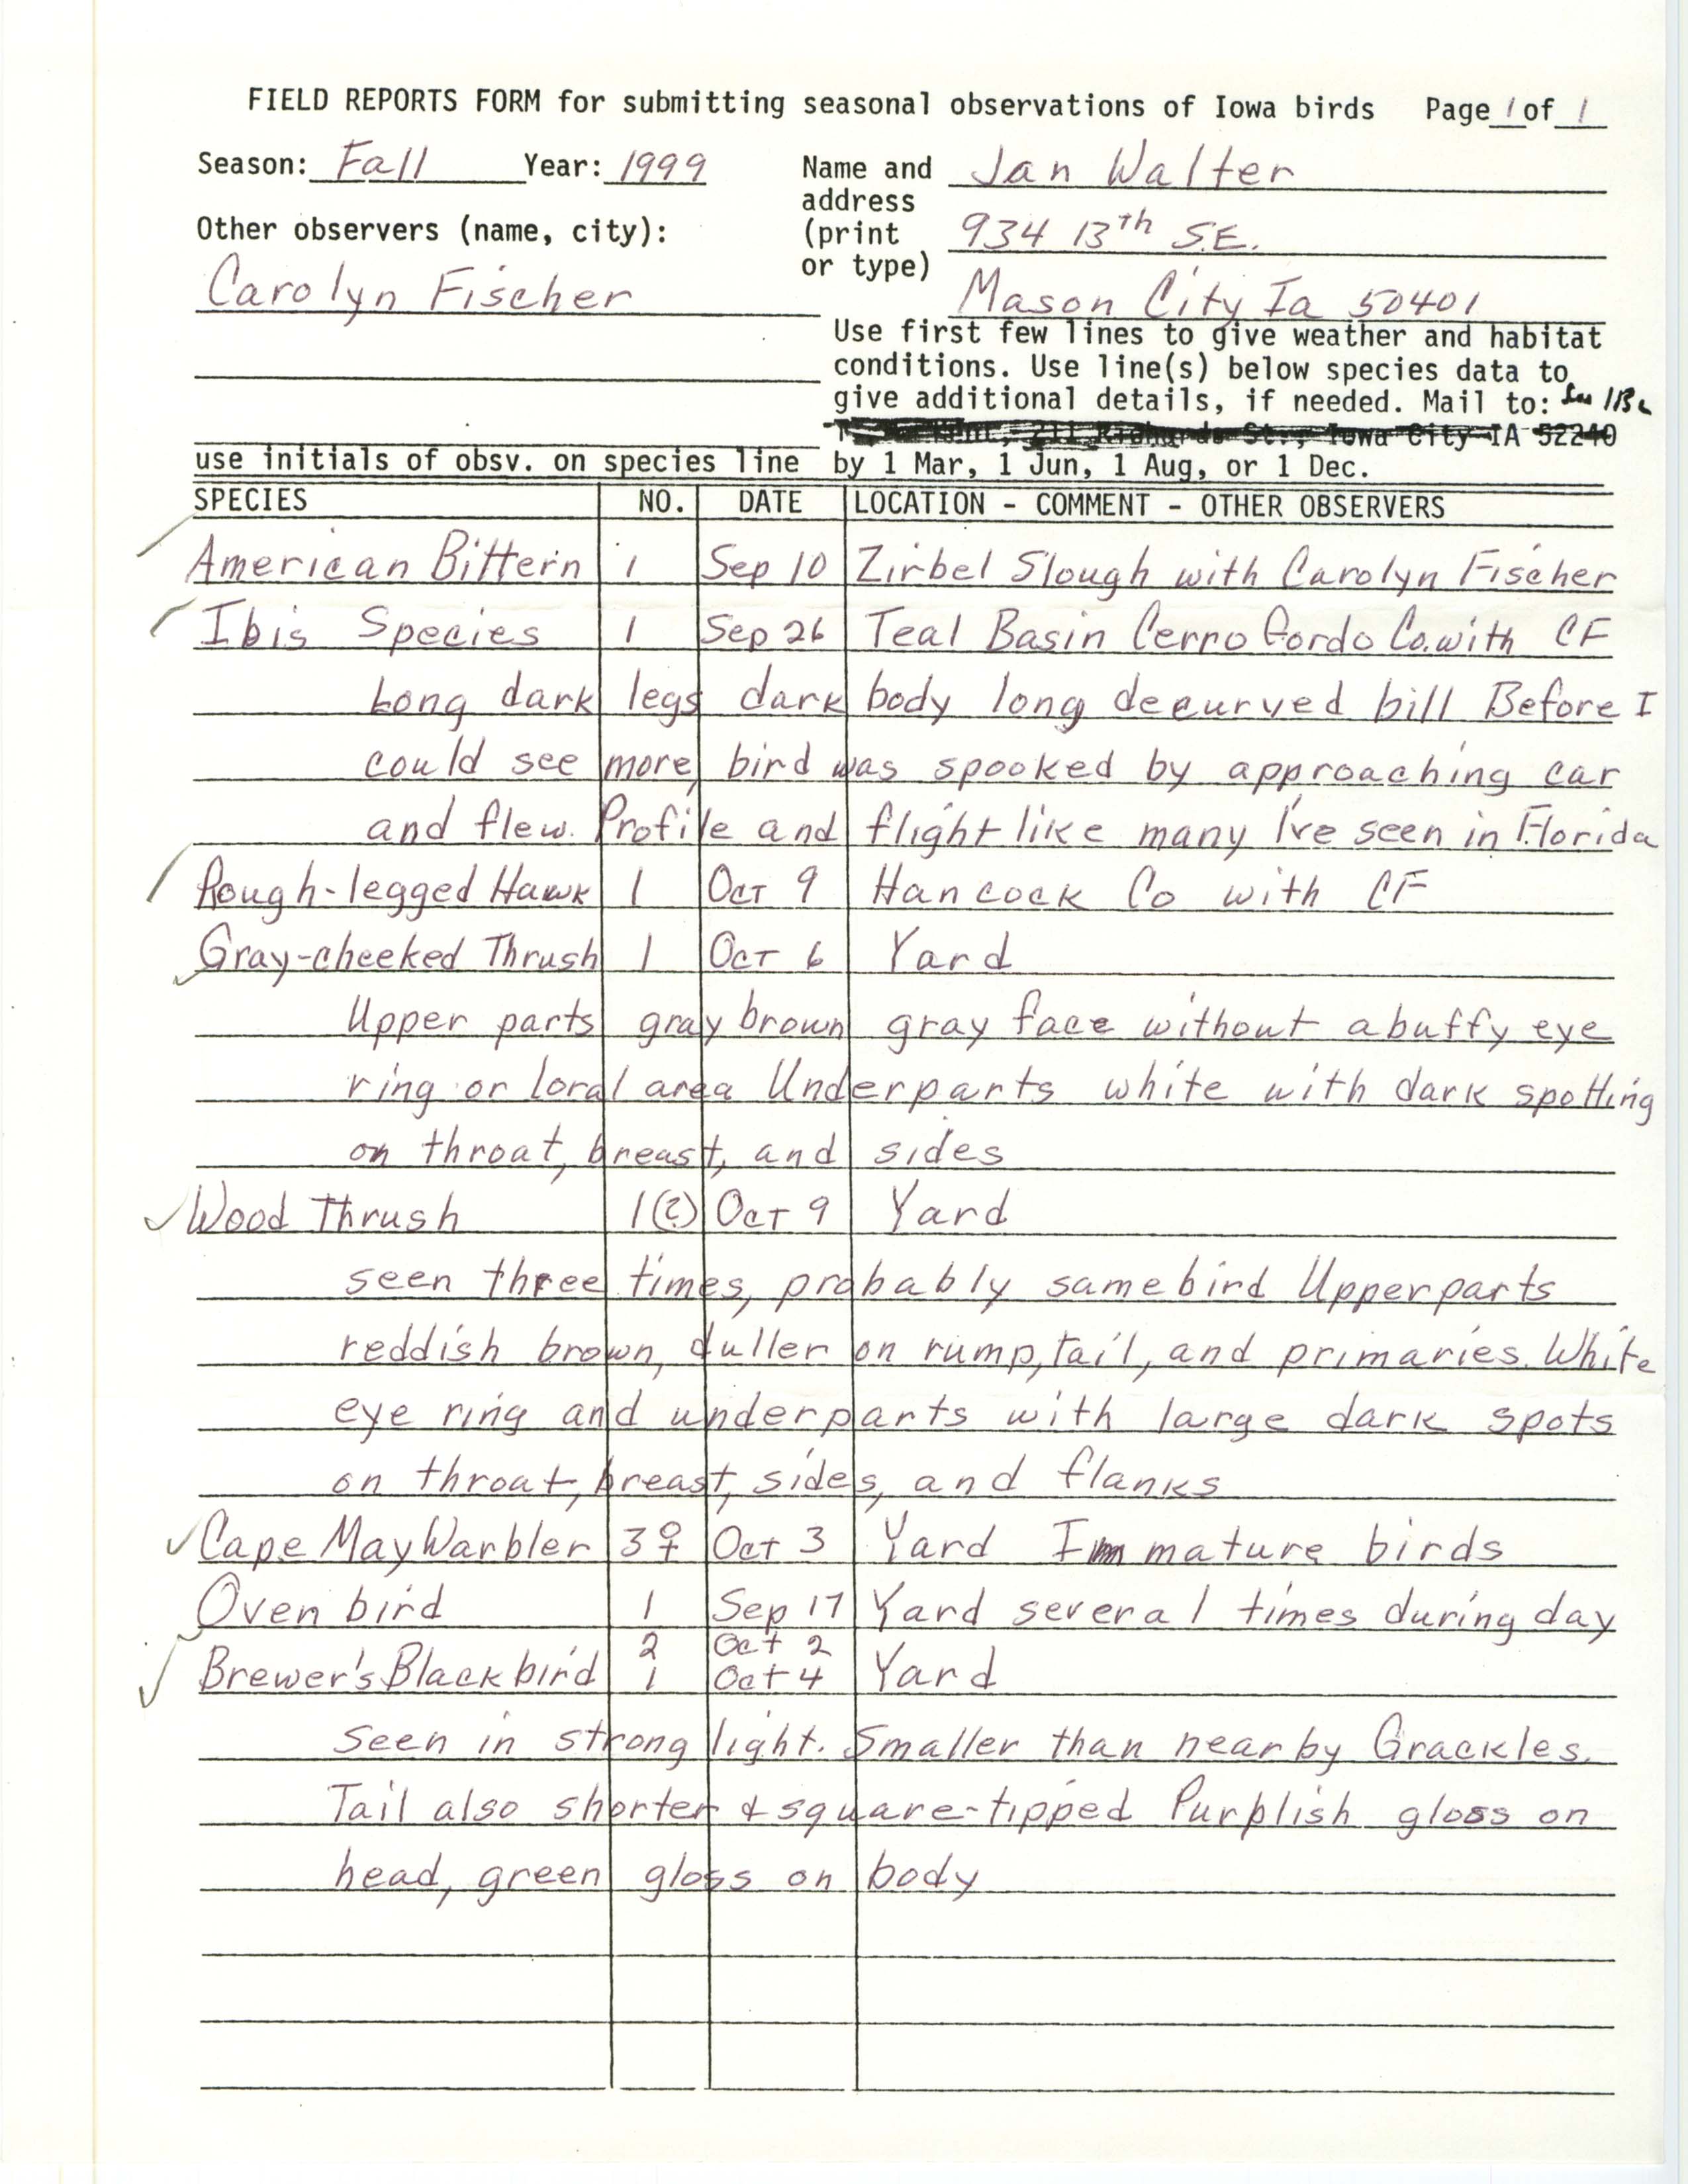 Field reports form for submitting seasonal observations of Iowa birds, fall 1999, Jan Walter